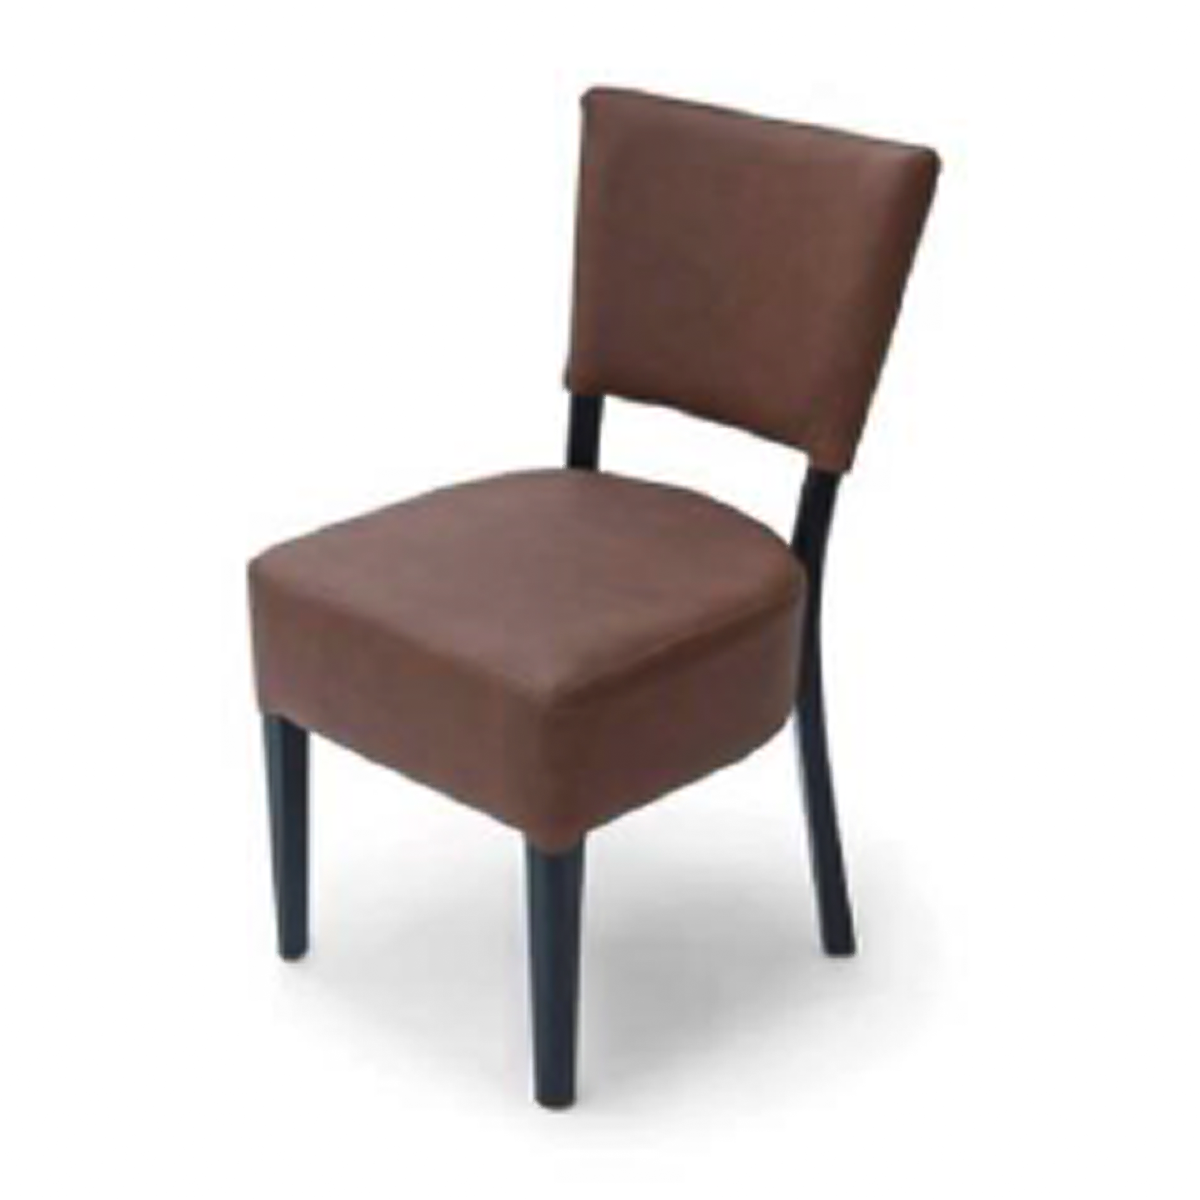 Dining chair 50×50 cm - MADE221